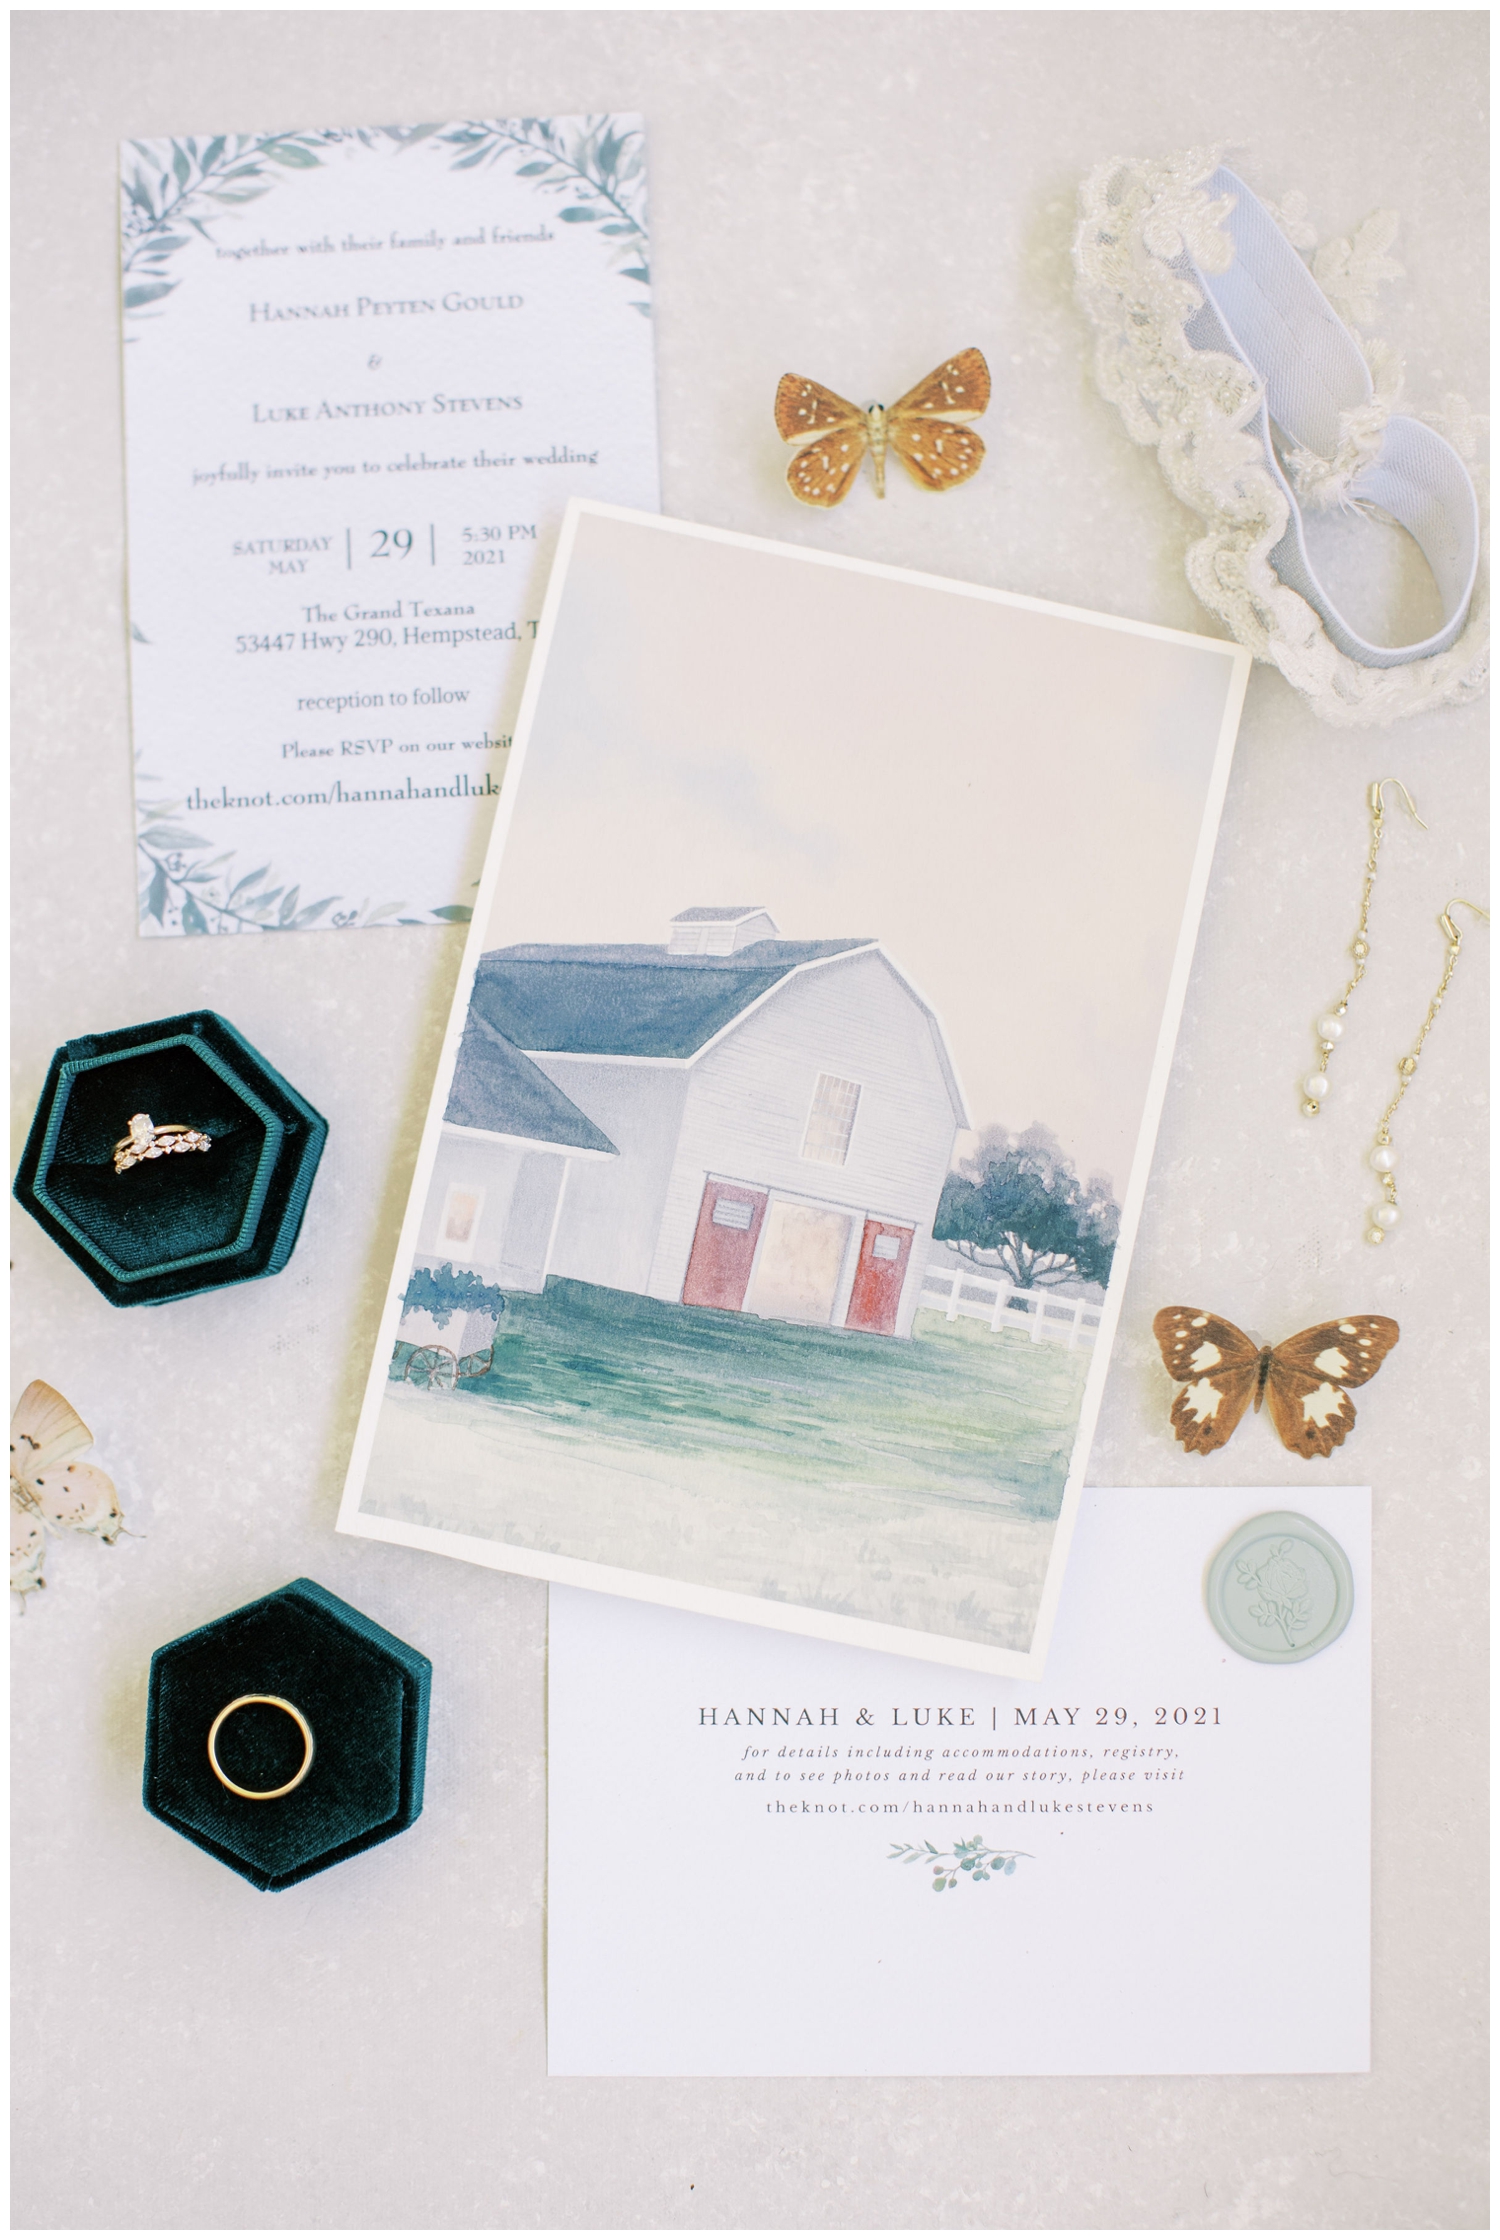 The Grand Texana drawing in invitation suite for white barn wedding